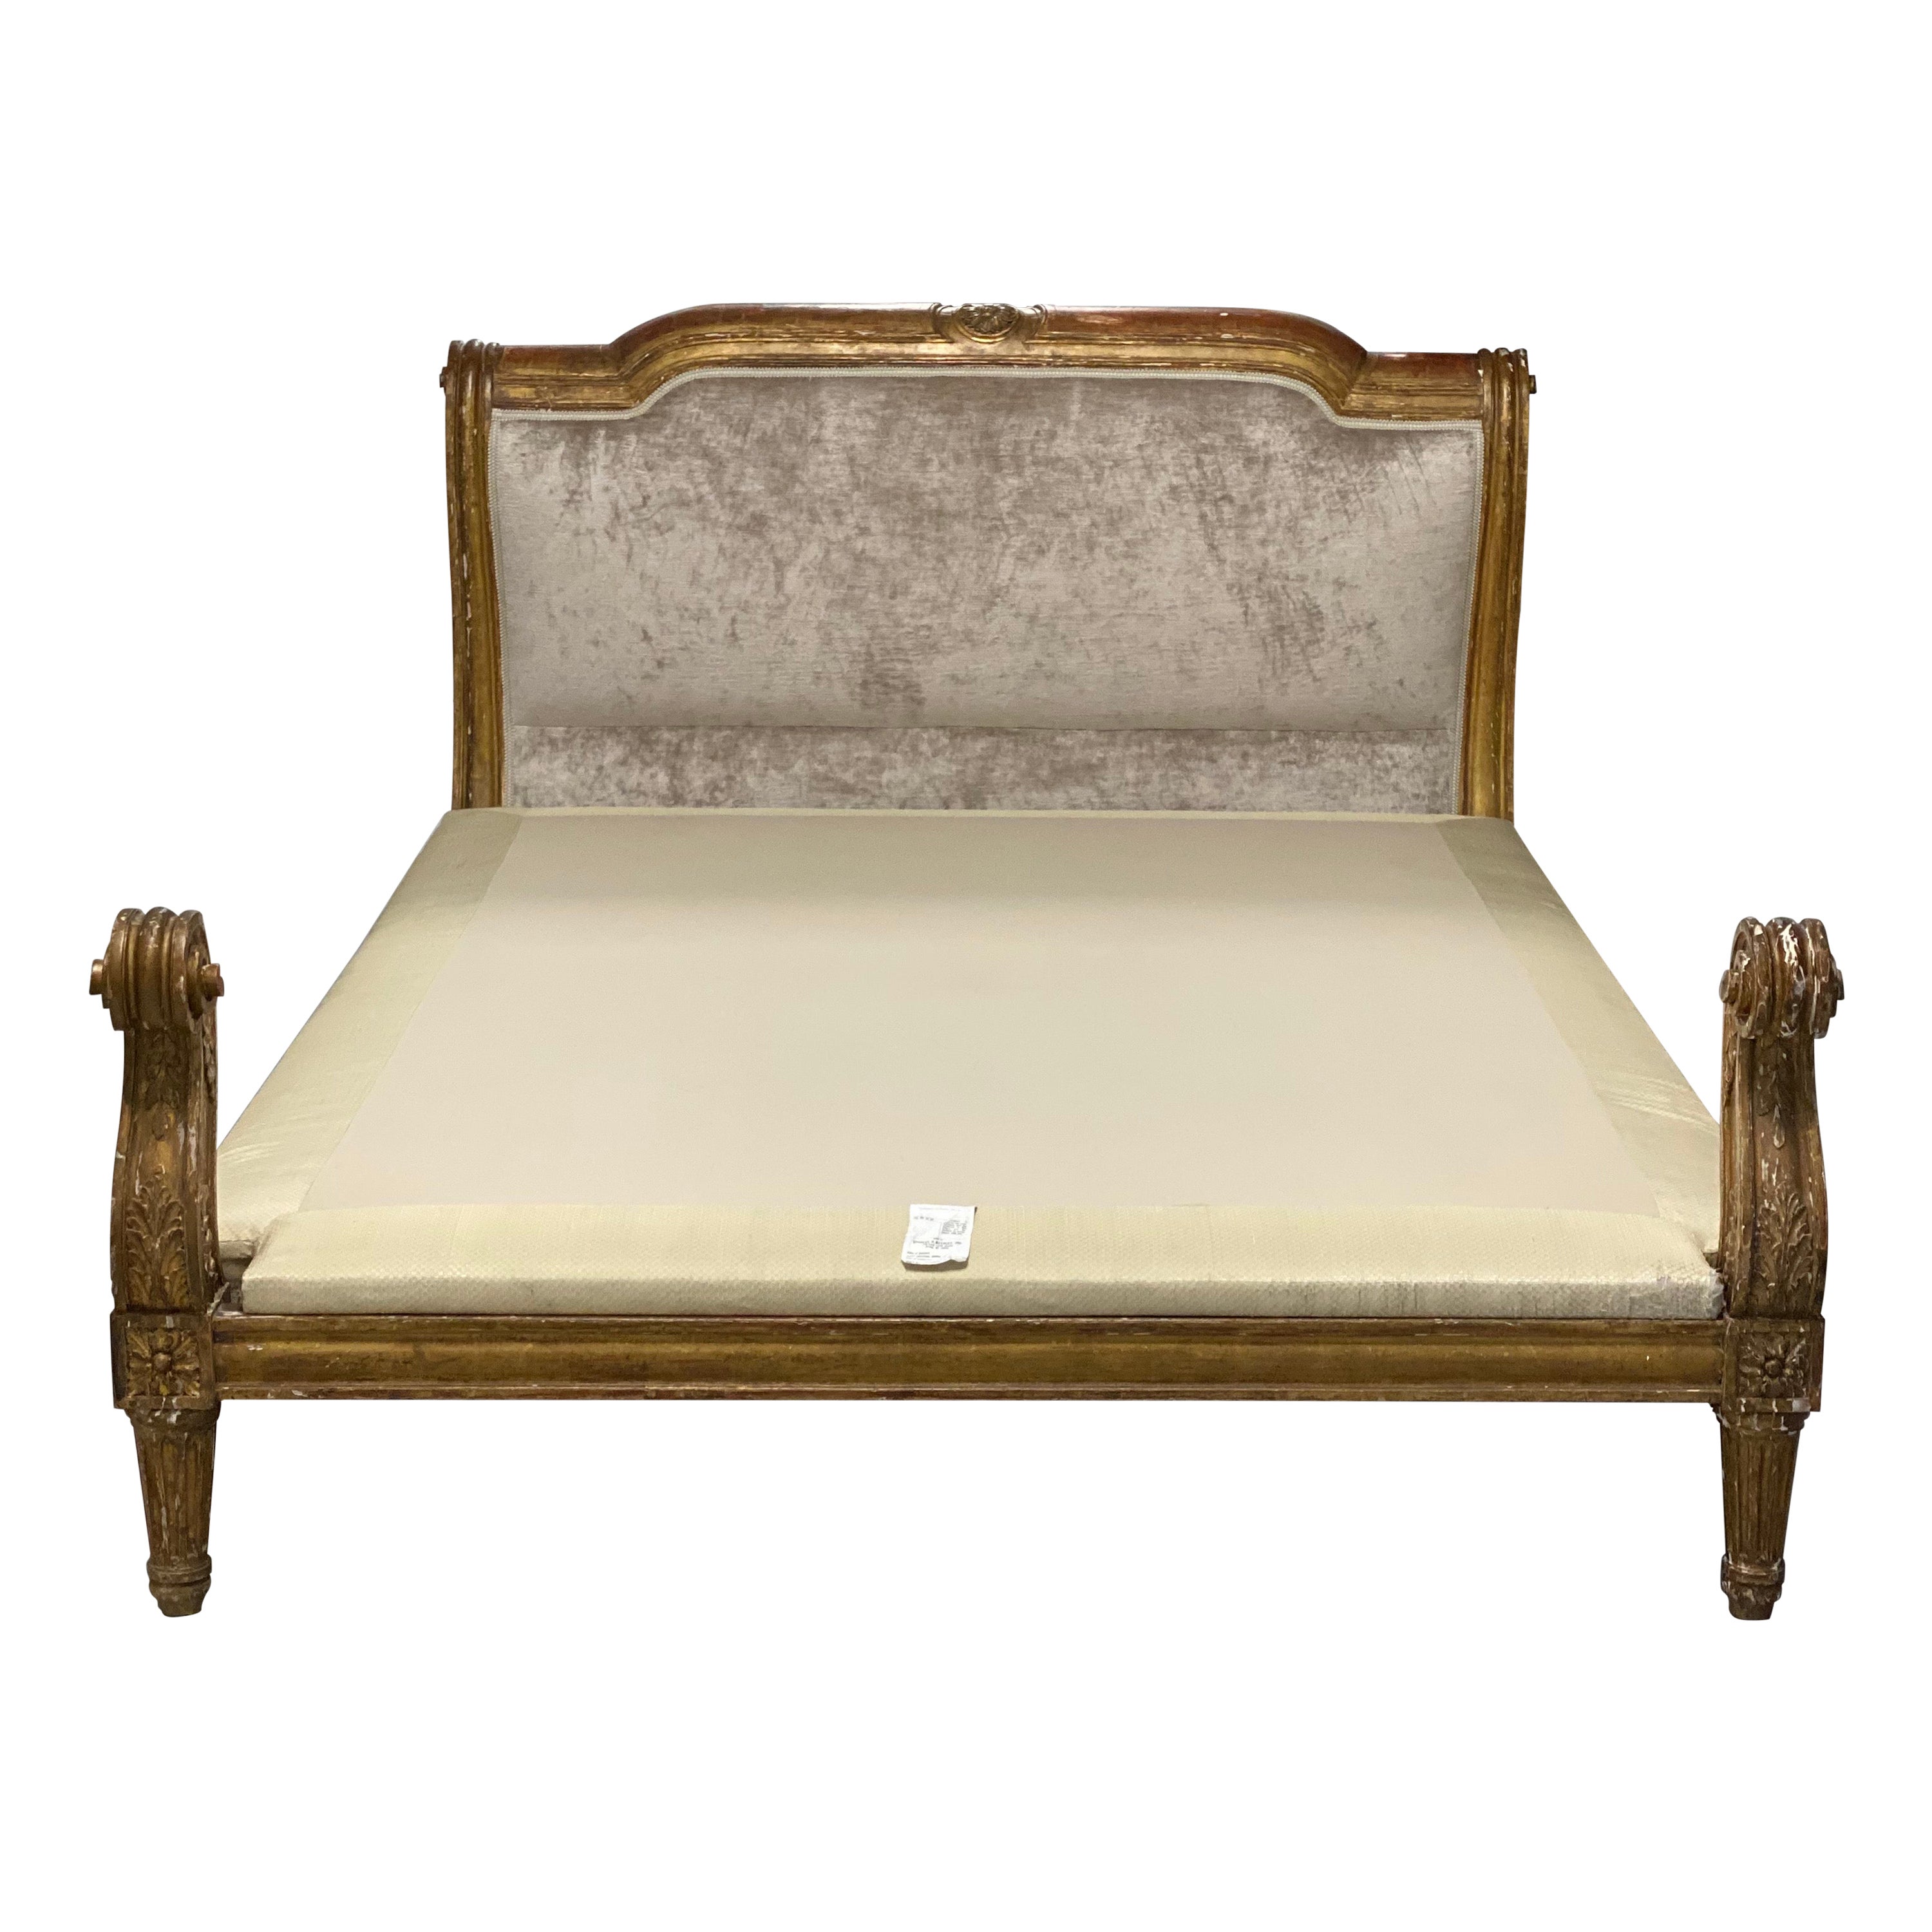 19th C. French Gilt-Wood Customized Queen Sleigh Bed with Mattress, David Easton